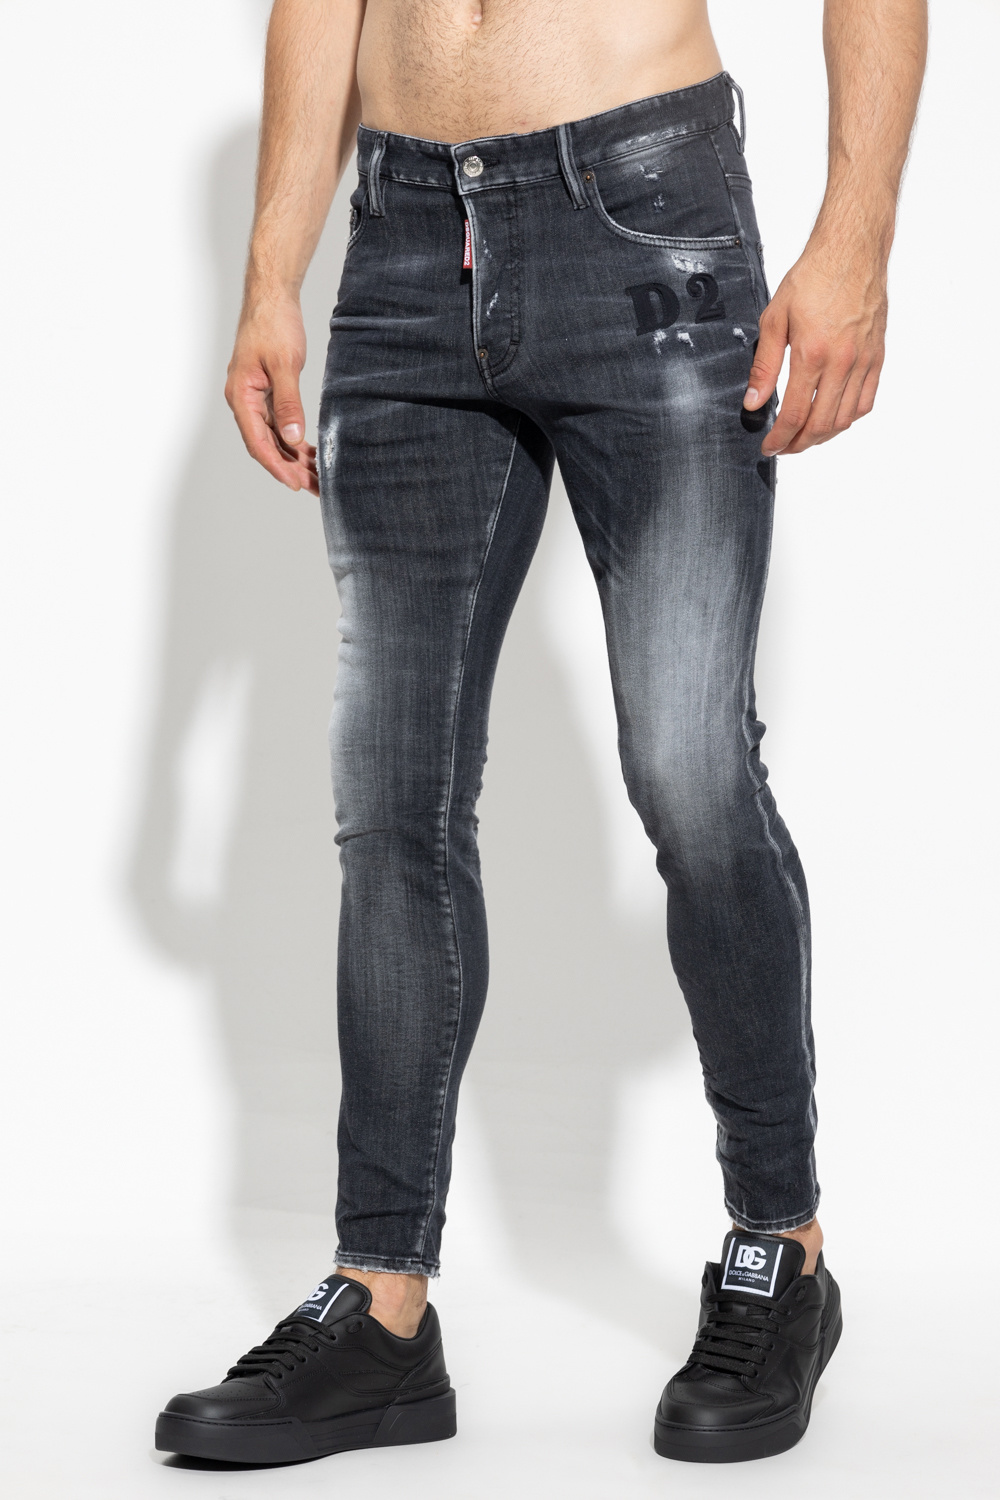 IetpShops Canada - Black 'Super Twinky' features jeans Dsquared2